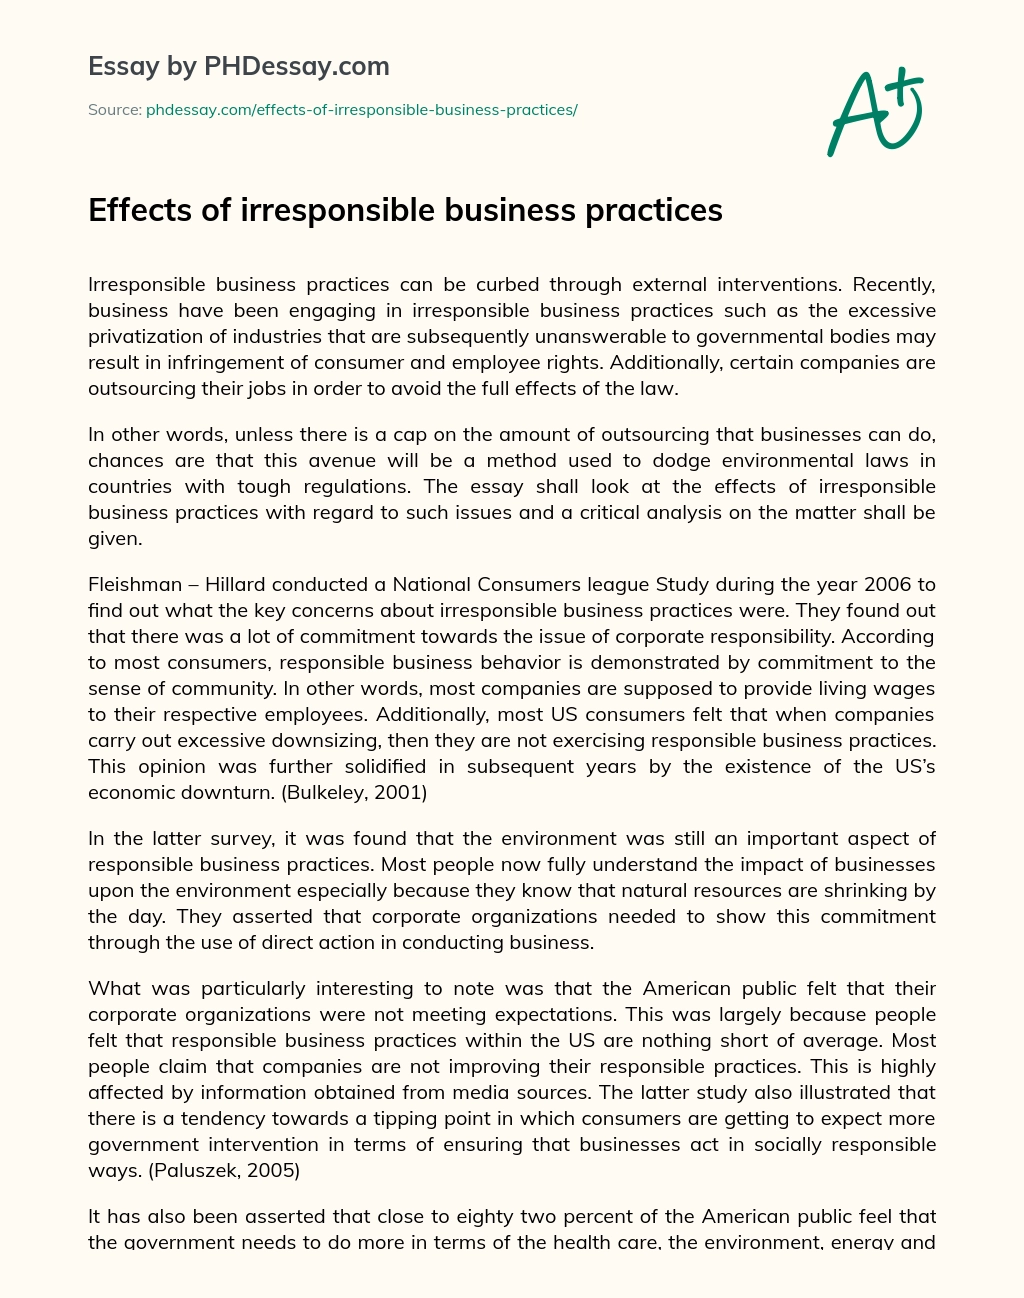 Effects of irresponsible business practices essay